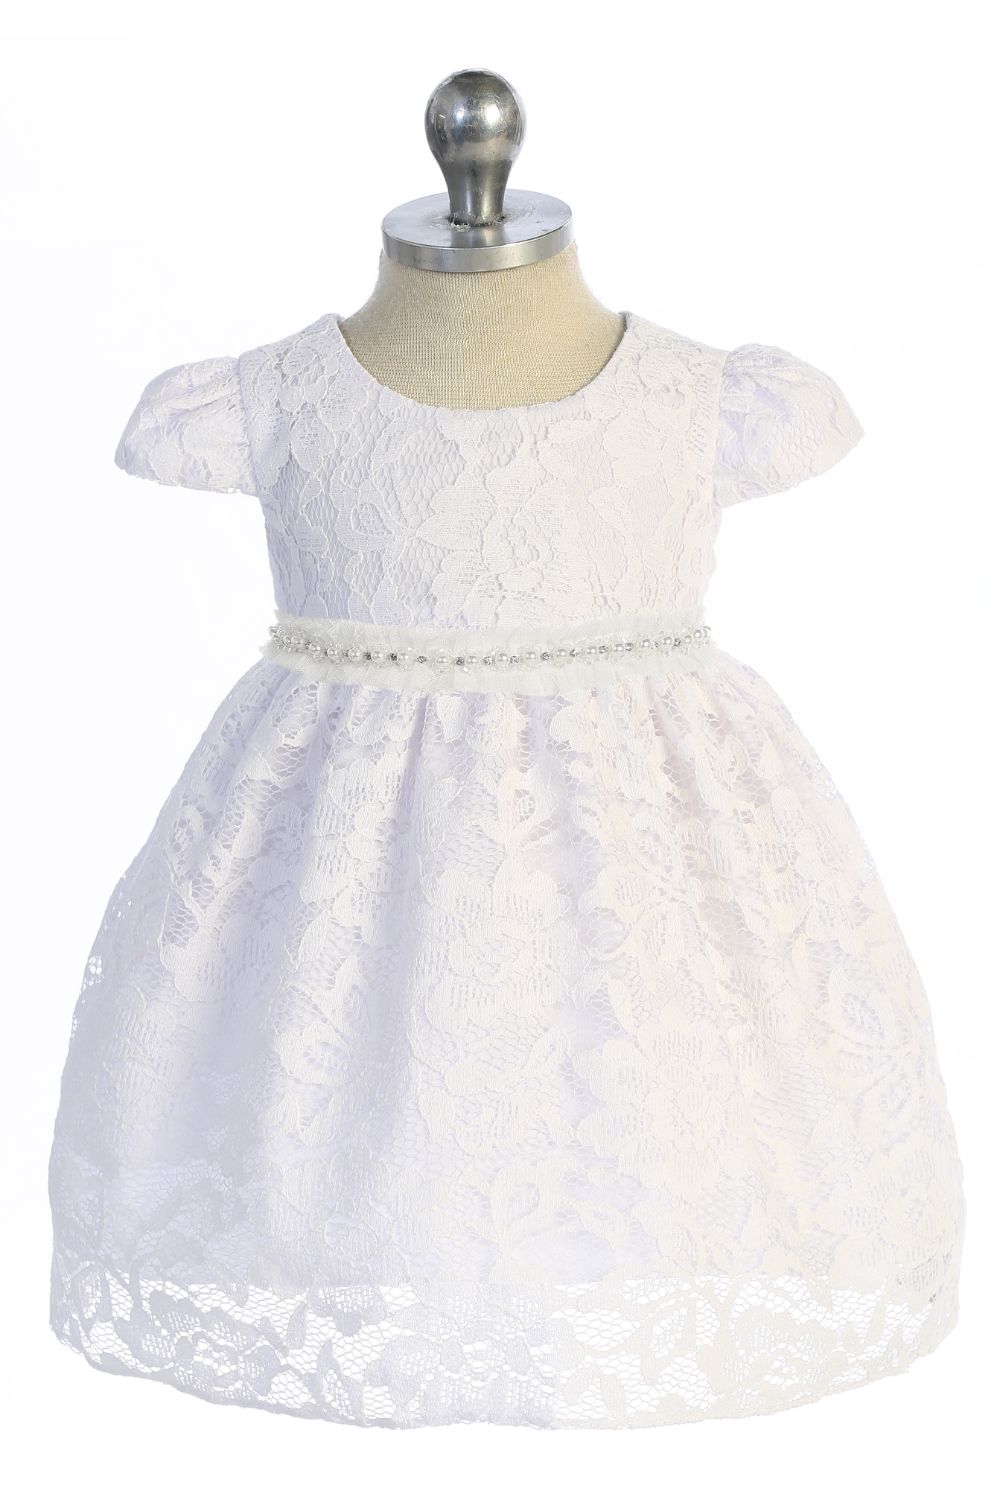 532-B All Lace Baby Dress with V Back & Bow and Mesh Pearl Trim